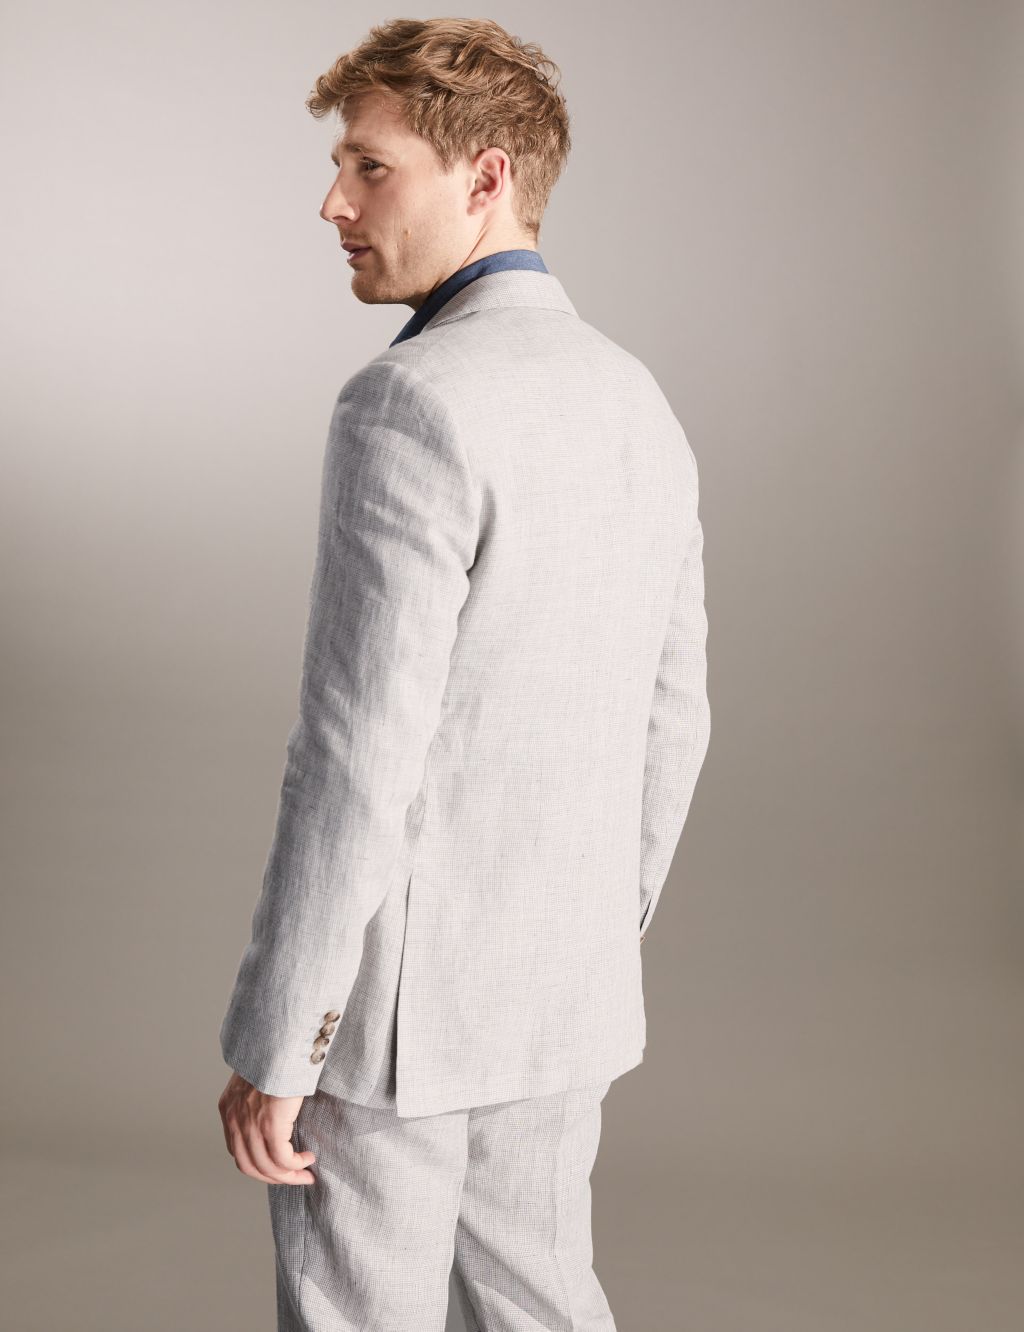 Pure Linen Puppytooth Jacket image 7